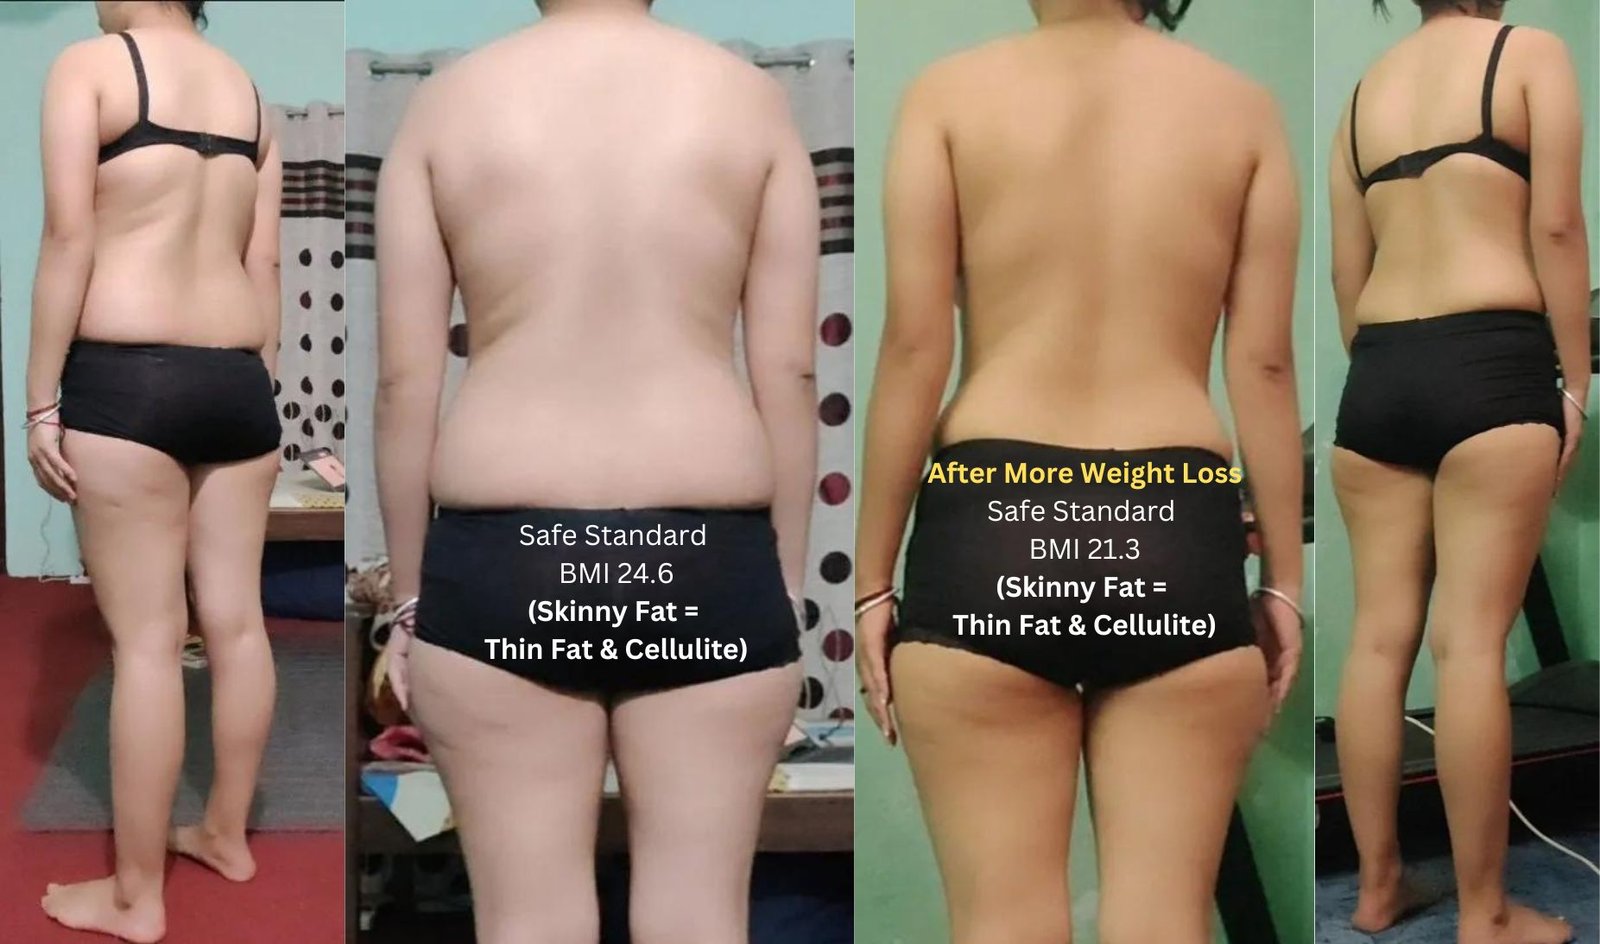 Skinny Fat Example - Normal Weight Obesity, Thin Fat, and Cellulite - Scientific Body Type Quiz Official 